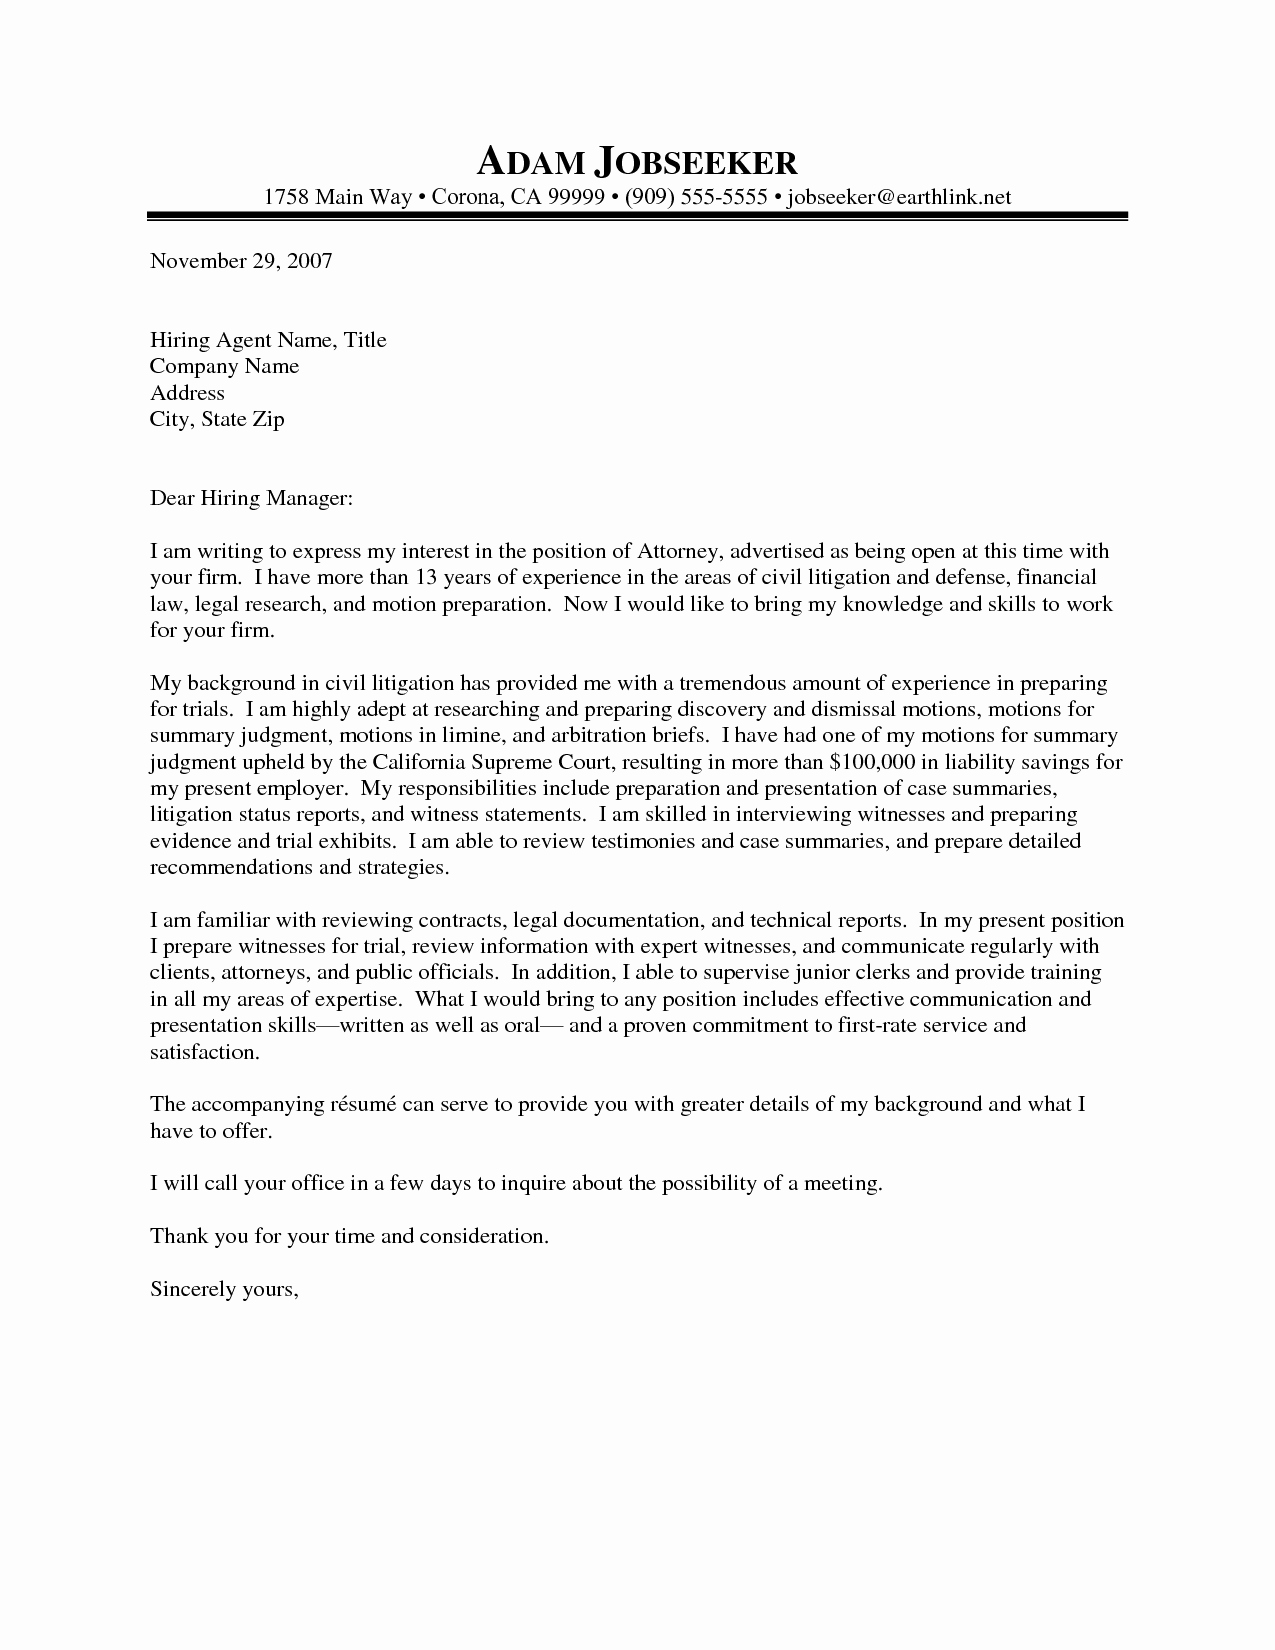 Legal Cover Letters Samples New attorney Cover Letter